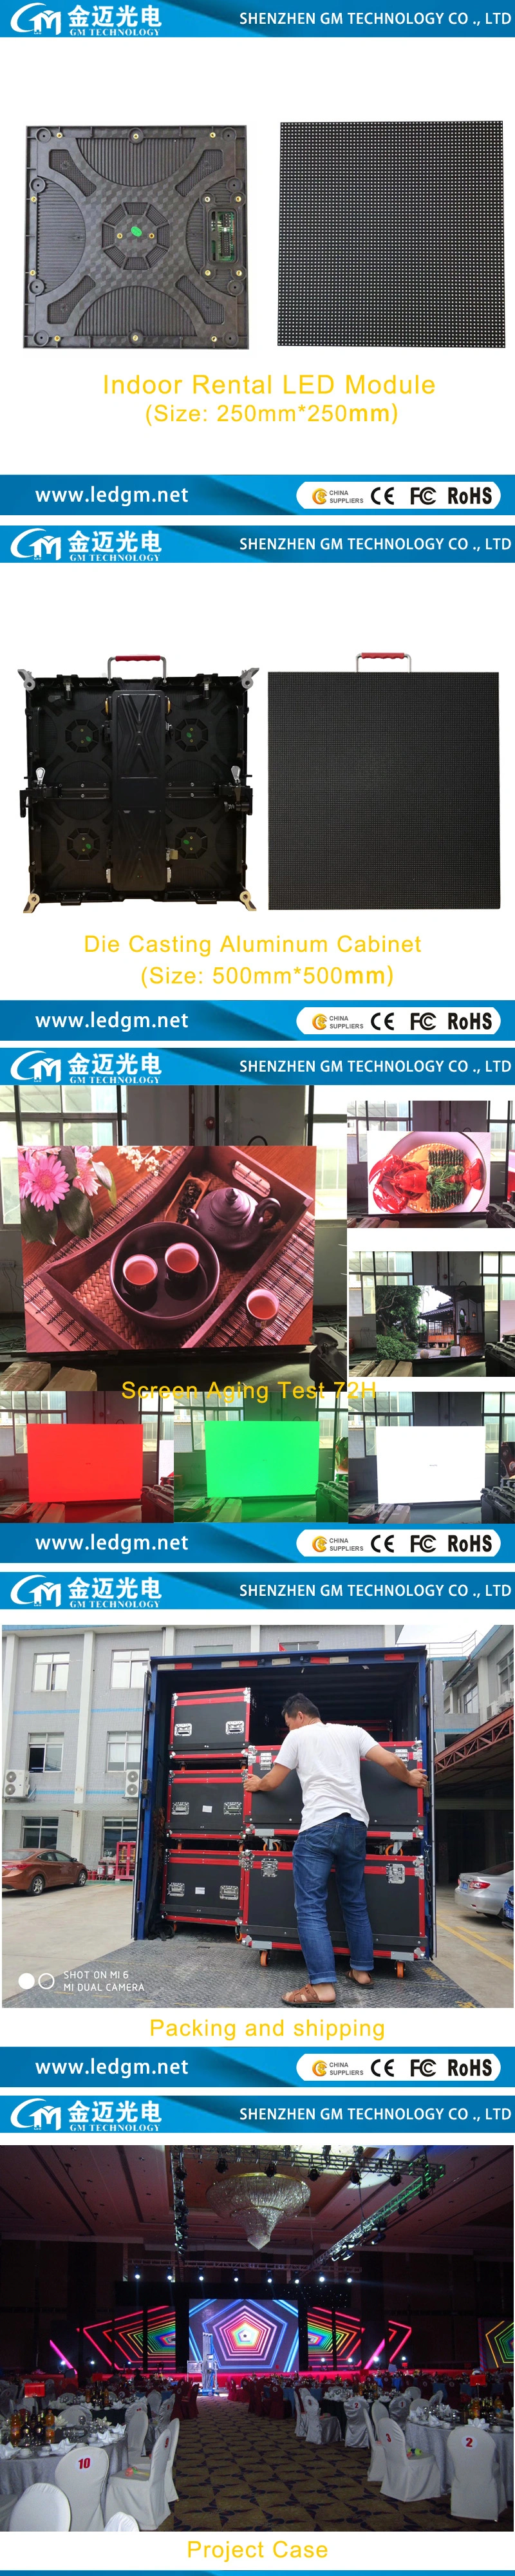 LED Factory High Quality P3.91 Indoor Outdoor High Refresh Rental LED Display Screen